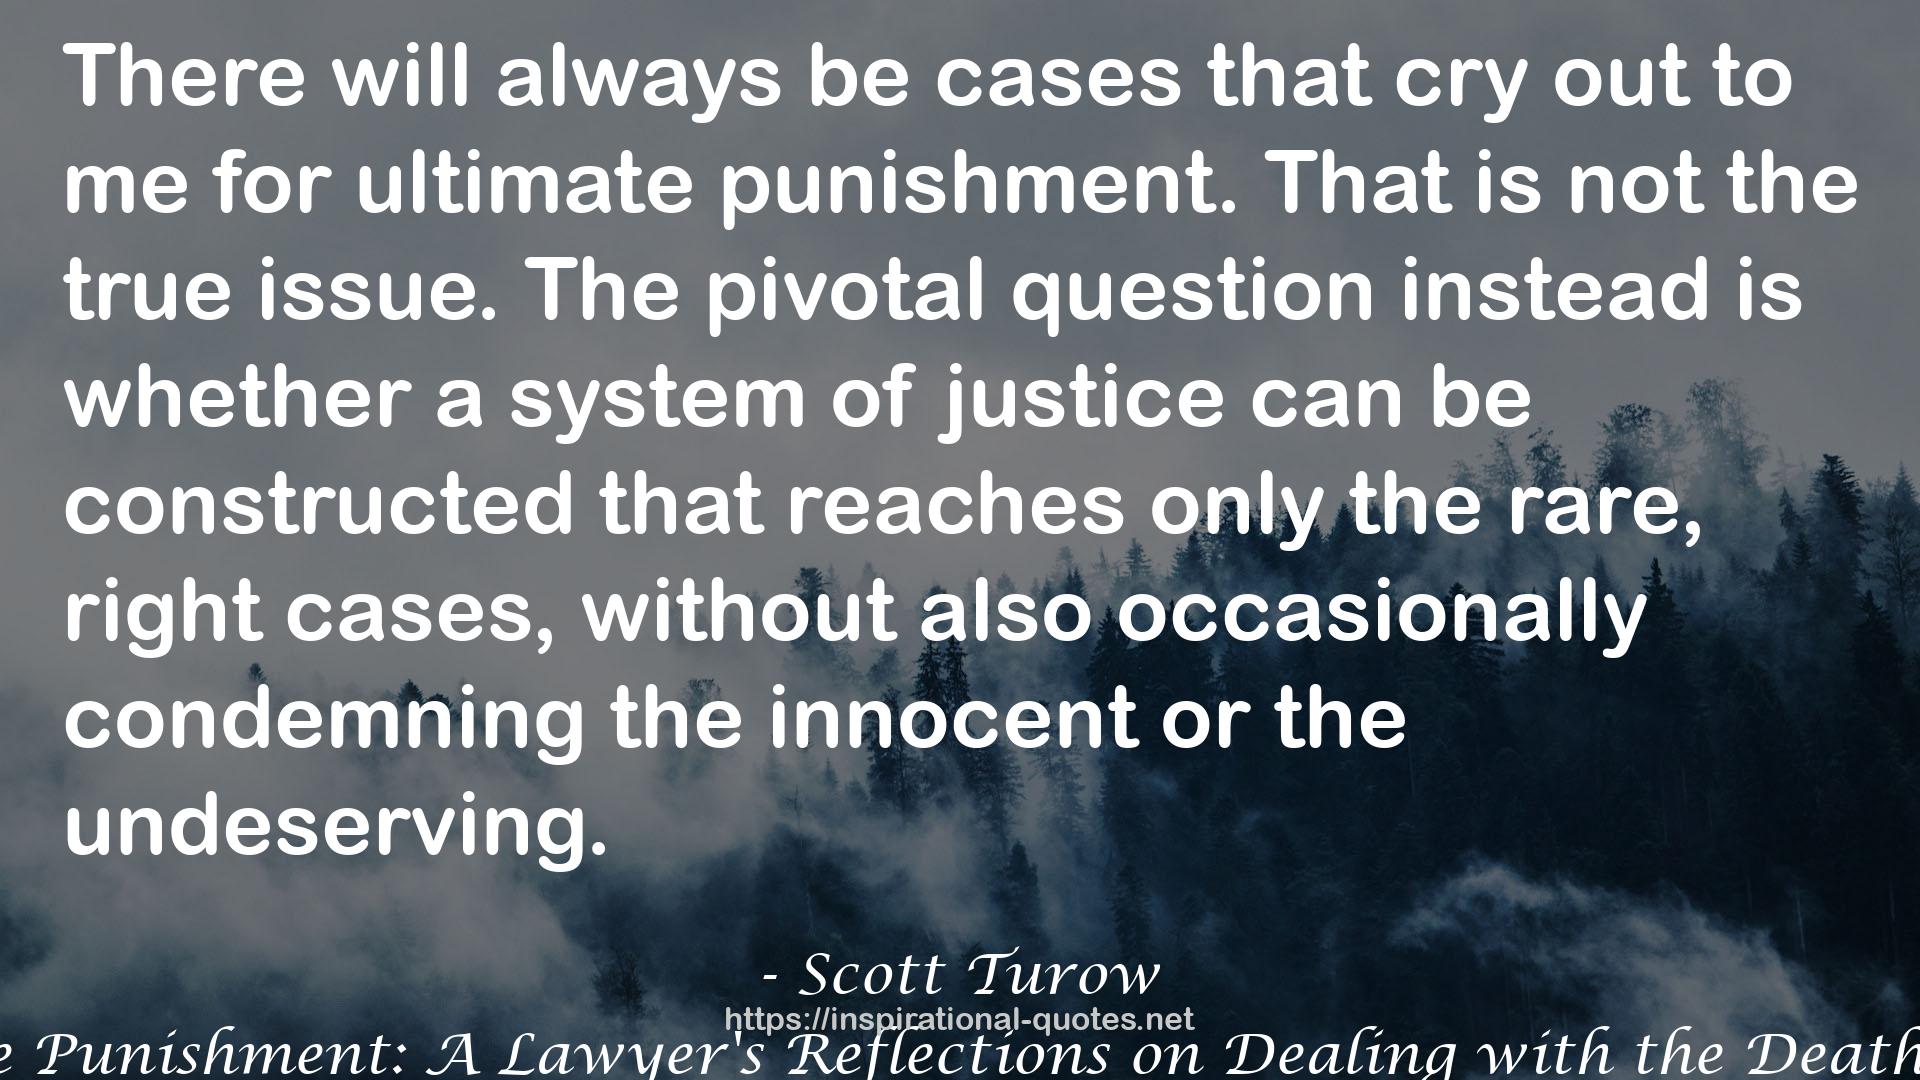 Ultimate Punishment: A Lawyer's Reflections on Dealing with the Death Penalty QUOTES